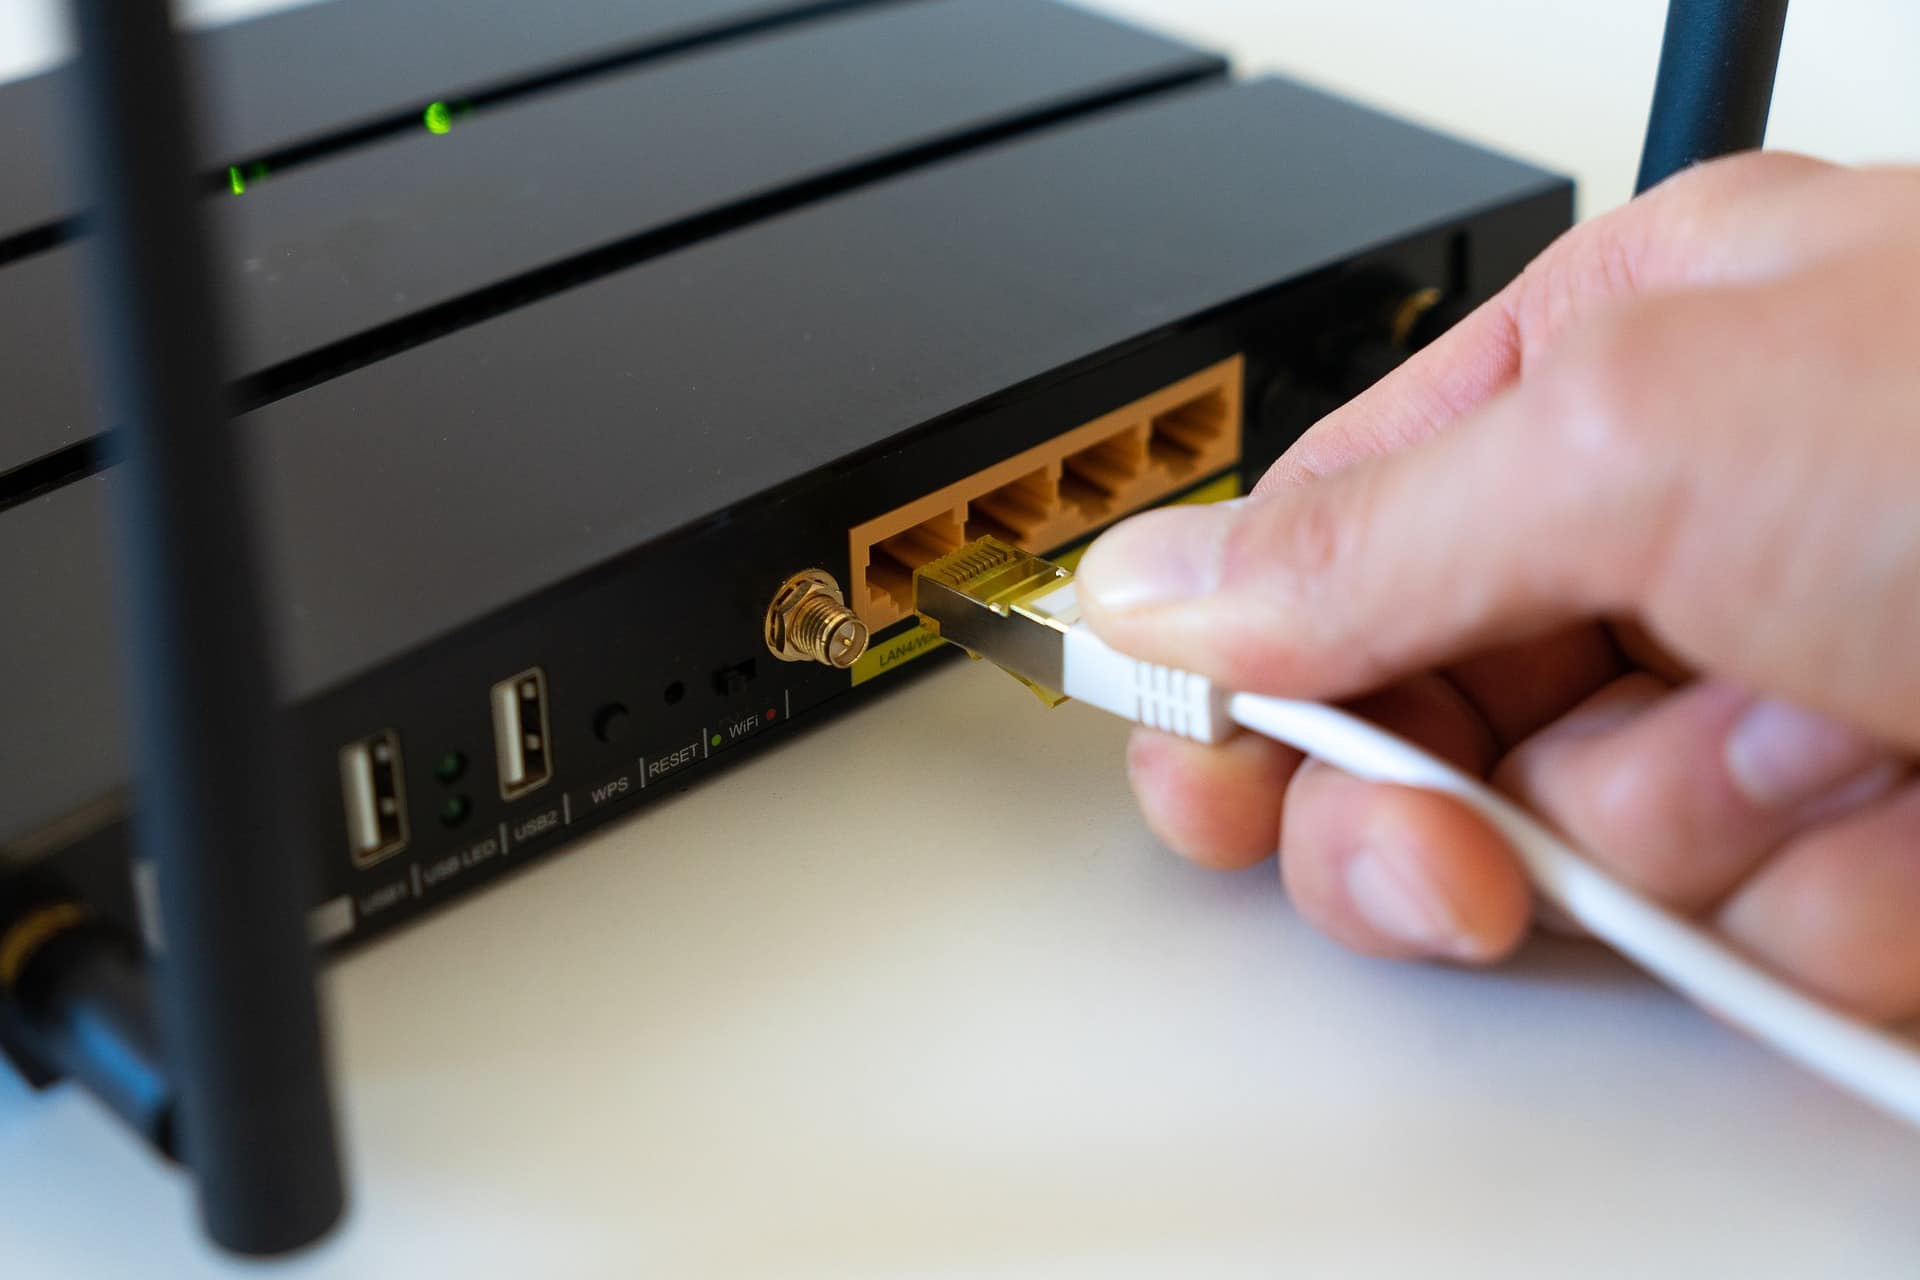 use a wired connection with ethernet cable to improve internet connection to fix Amazon Prime Video keeps buffering, stopping, freezing or not loading, working, internet connection/streaming problems